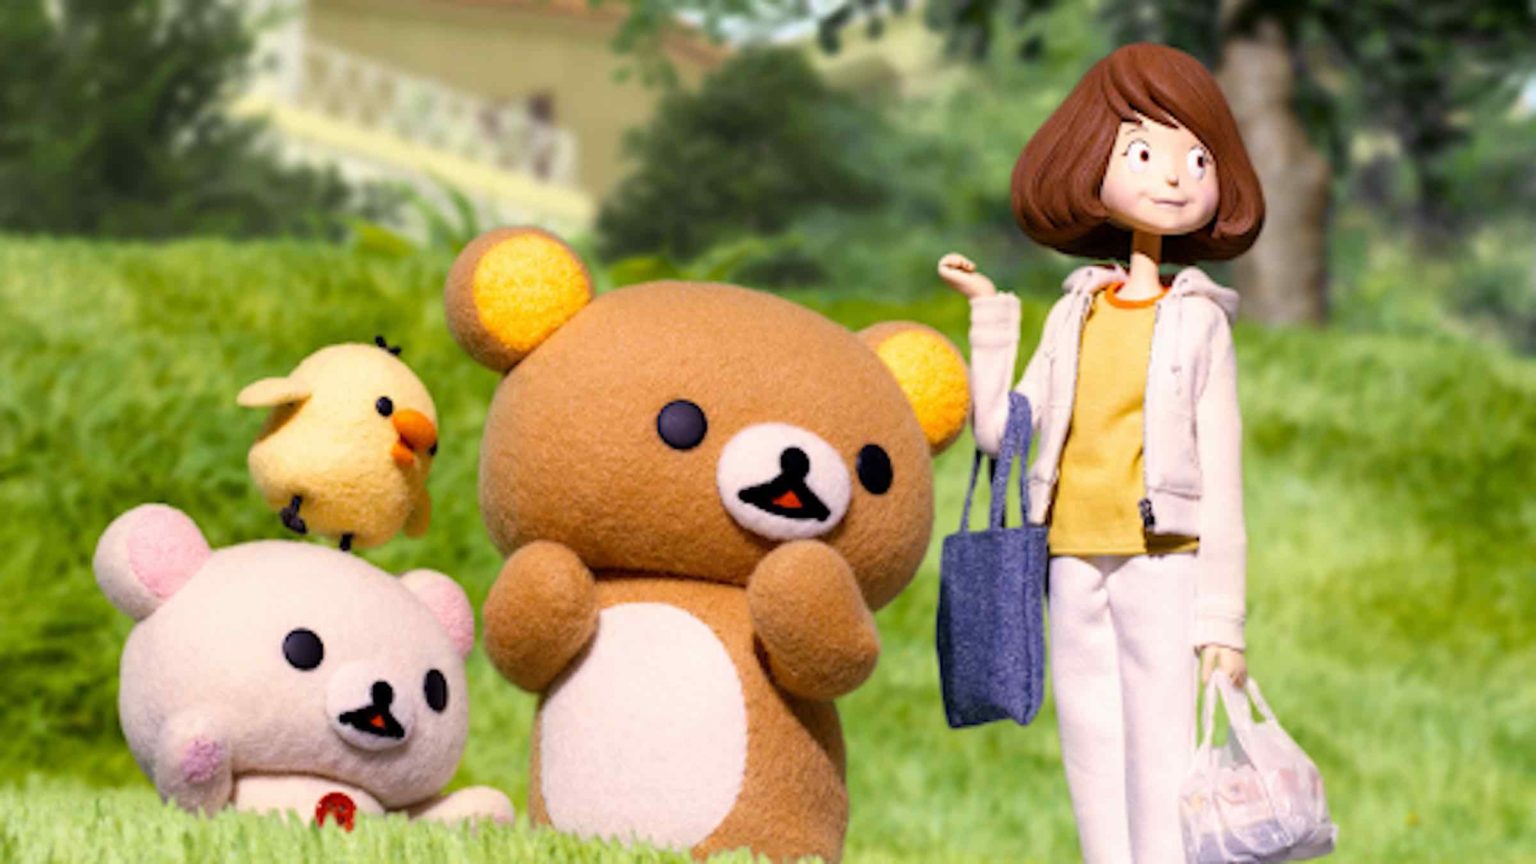 'Rilakkuma and Kaoru' hits a note of tranquility in the souls of its viewers. Here's why you should watch the most relaxing stop animation.